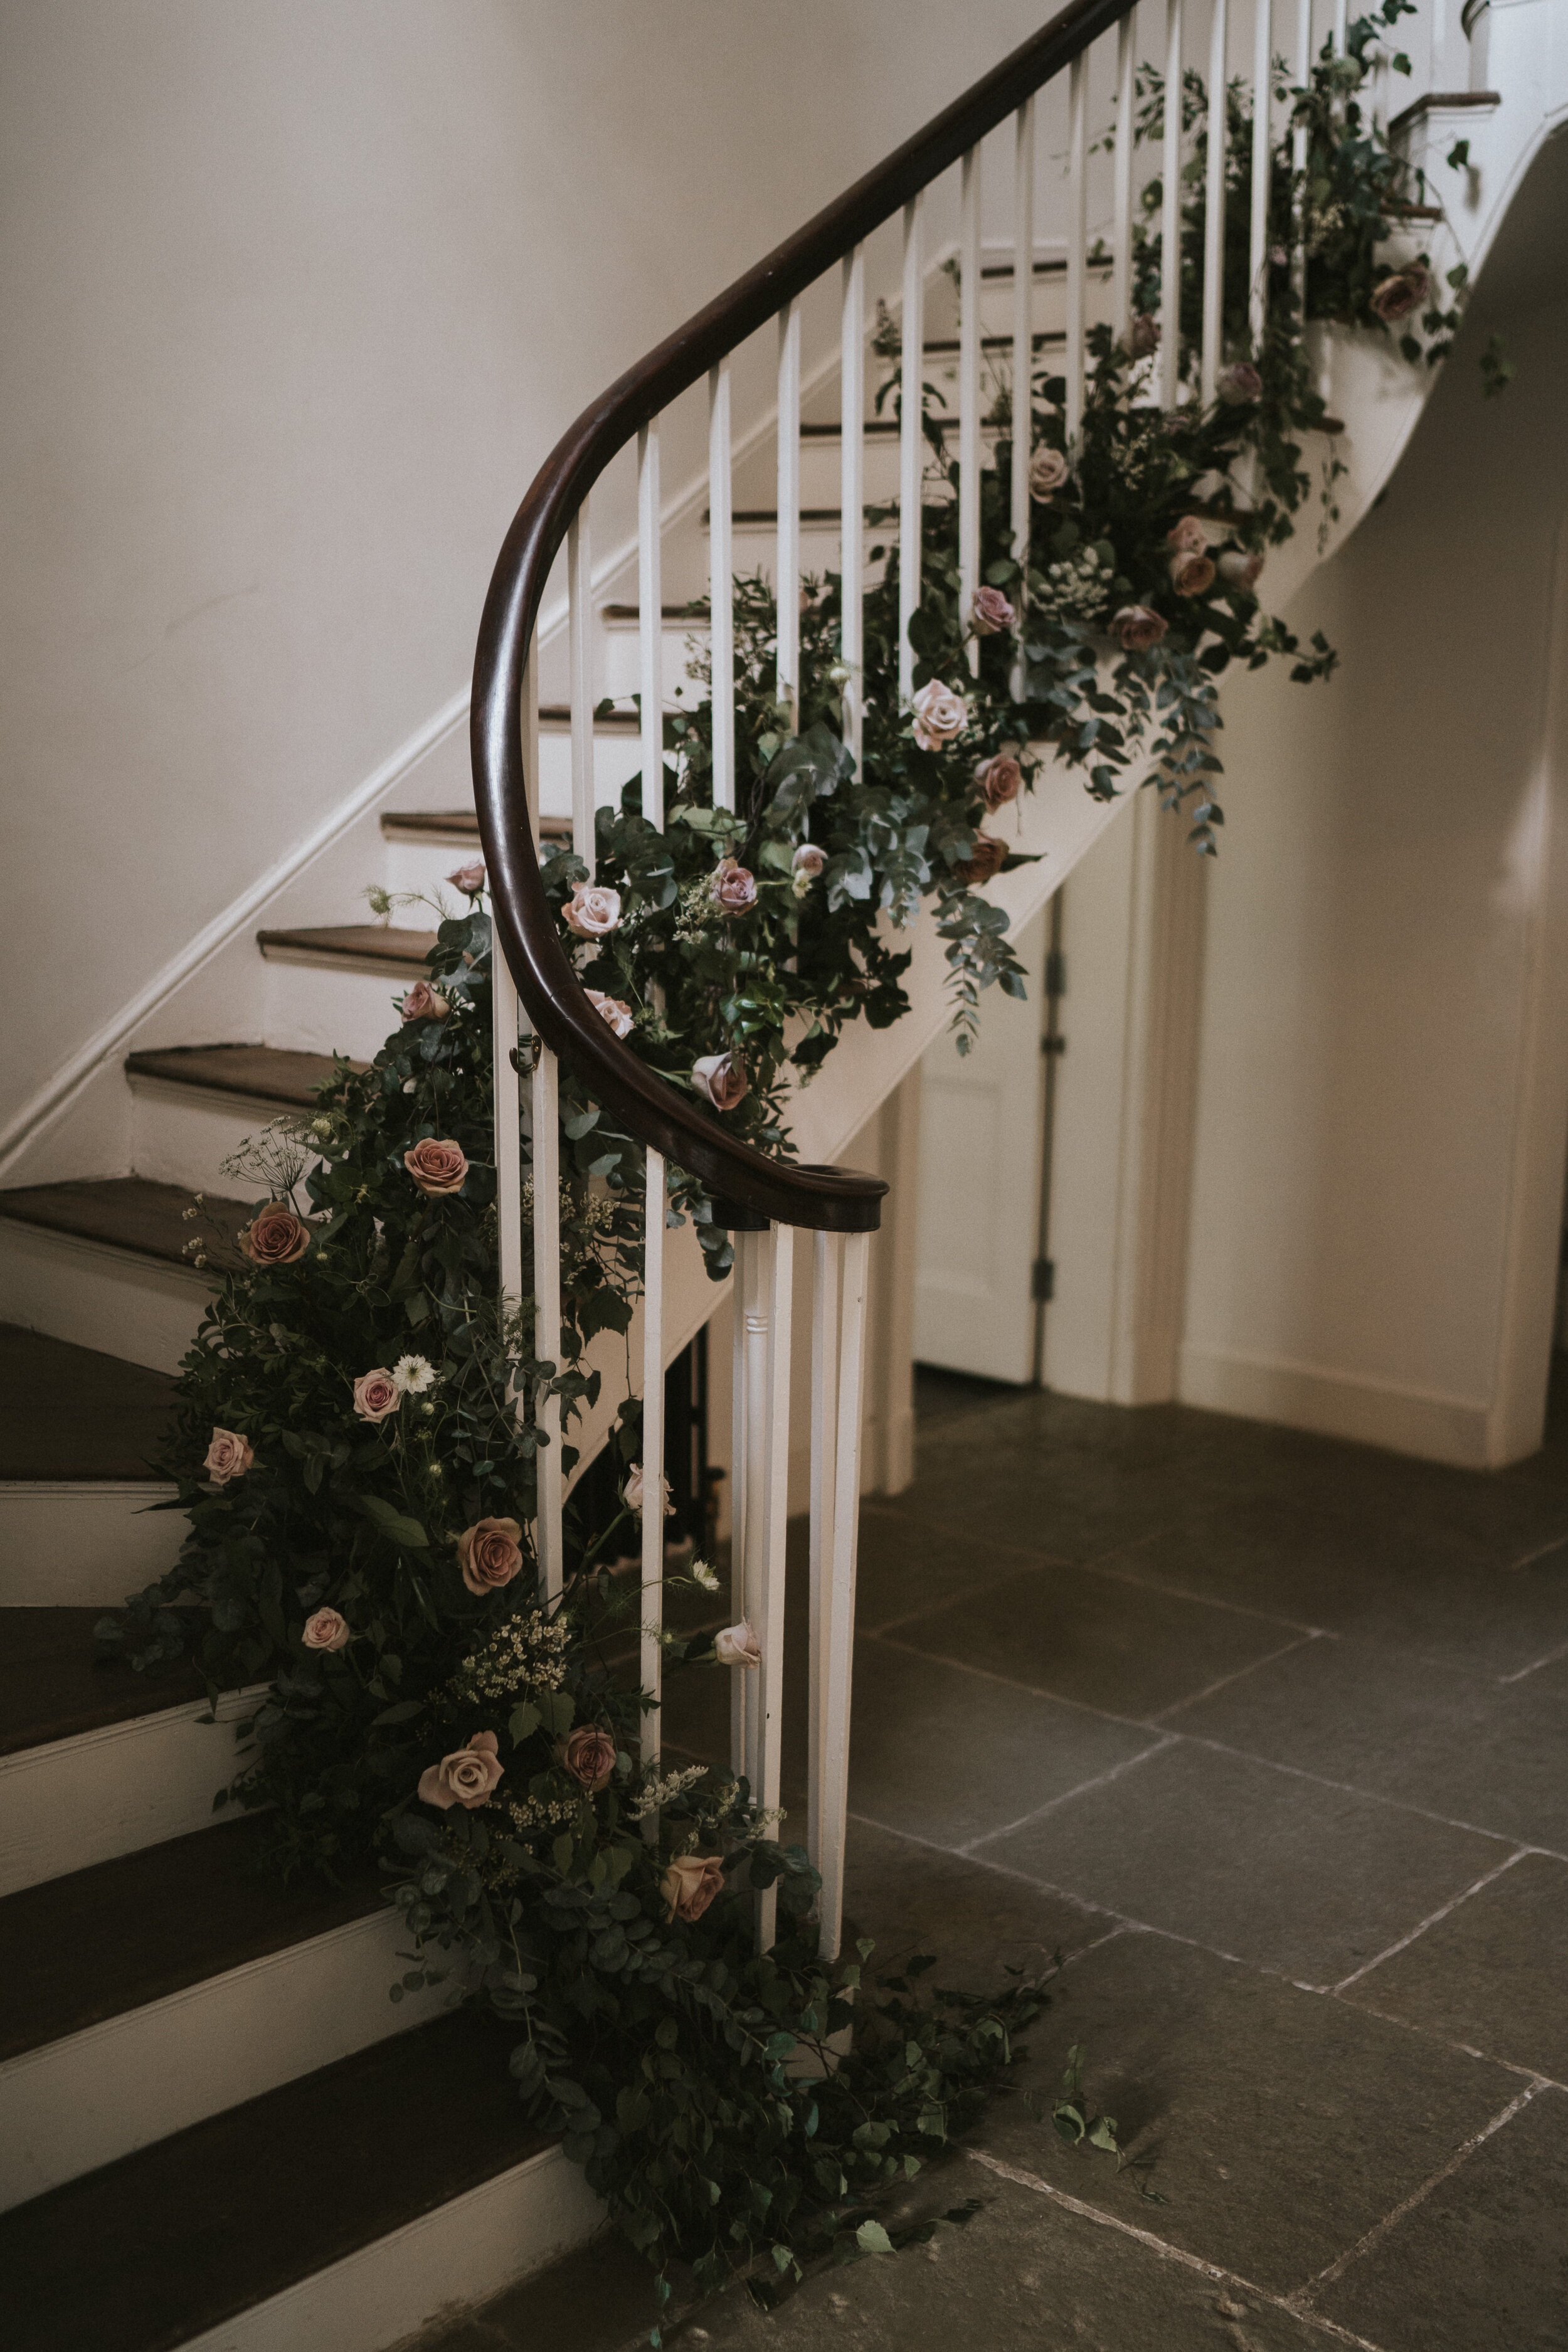  Floral wedding installation of roses and foliage on staircase at Aswarby Rectory, Sleaford, Lincolnshire. 